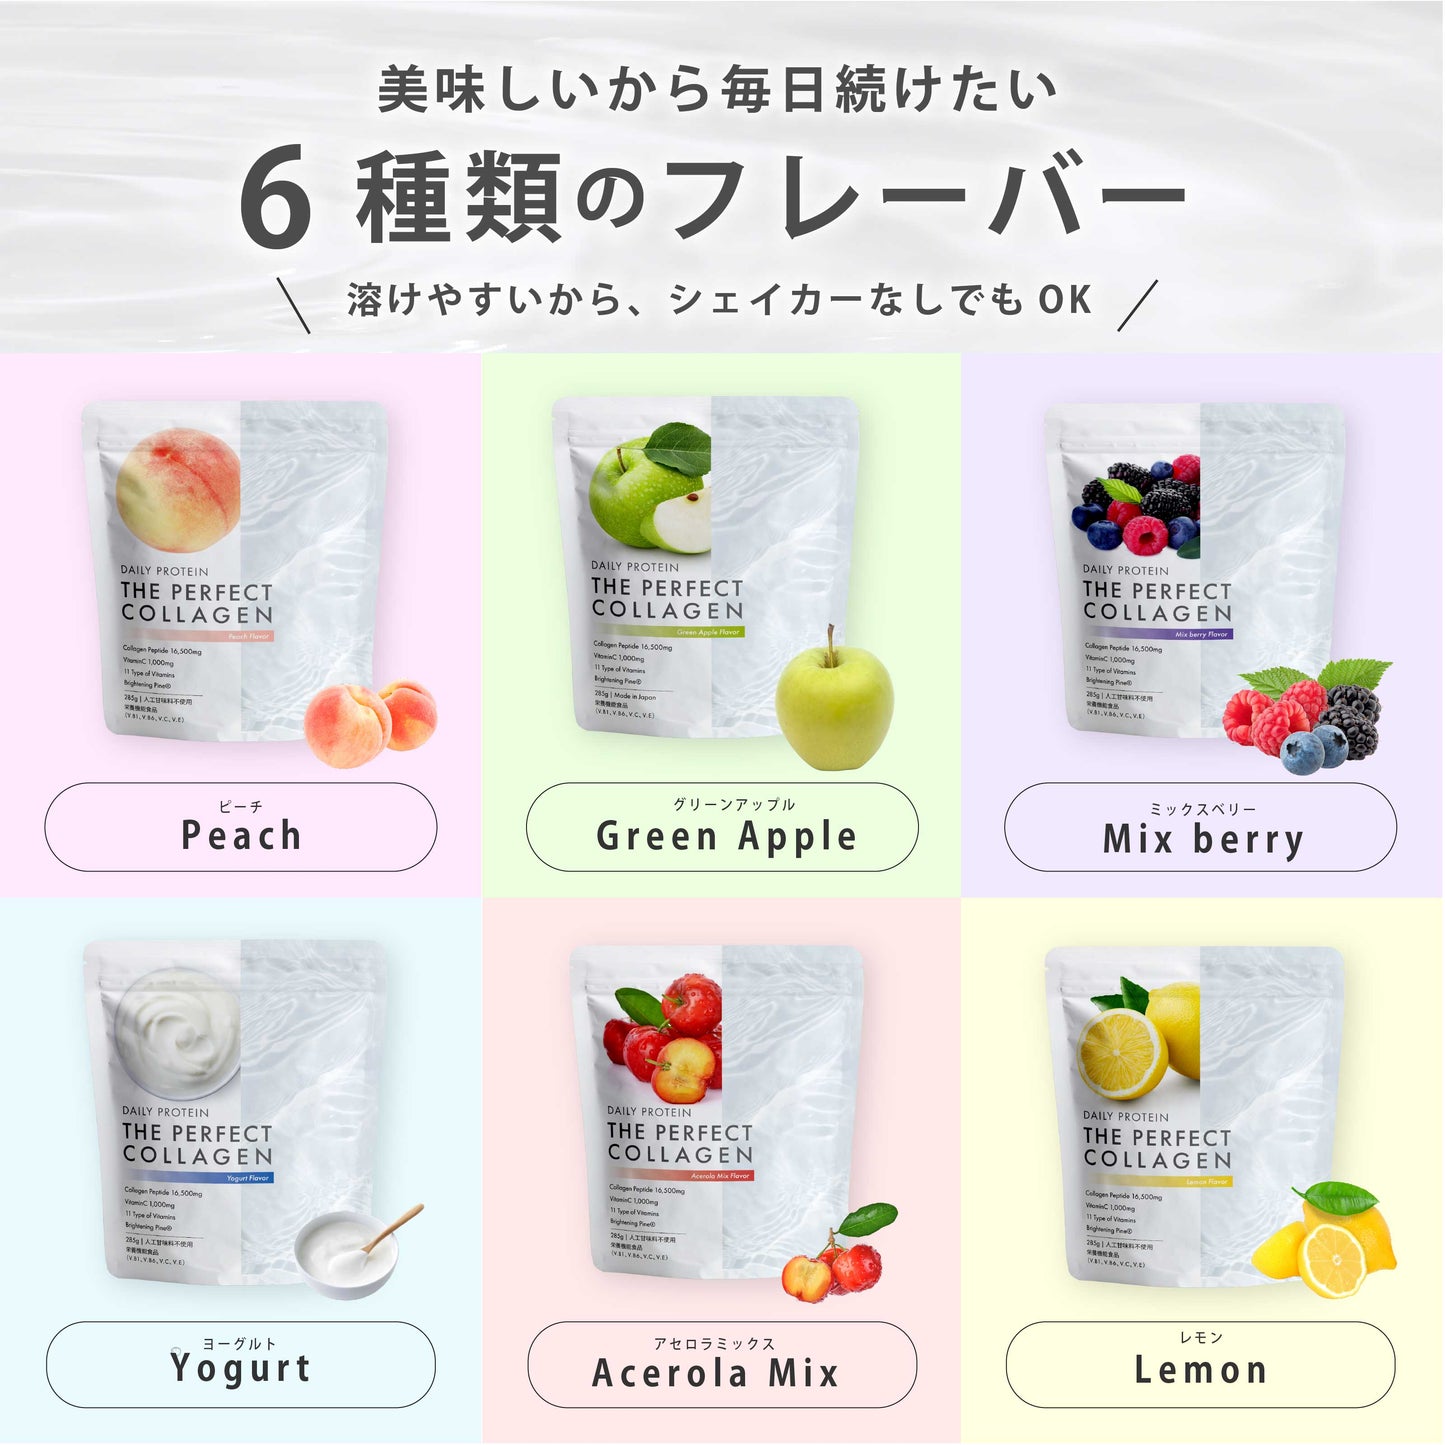 Daily Protein THE PERFECT COLLAGEN グリーンアップルフレーバー味 285g